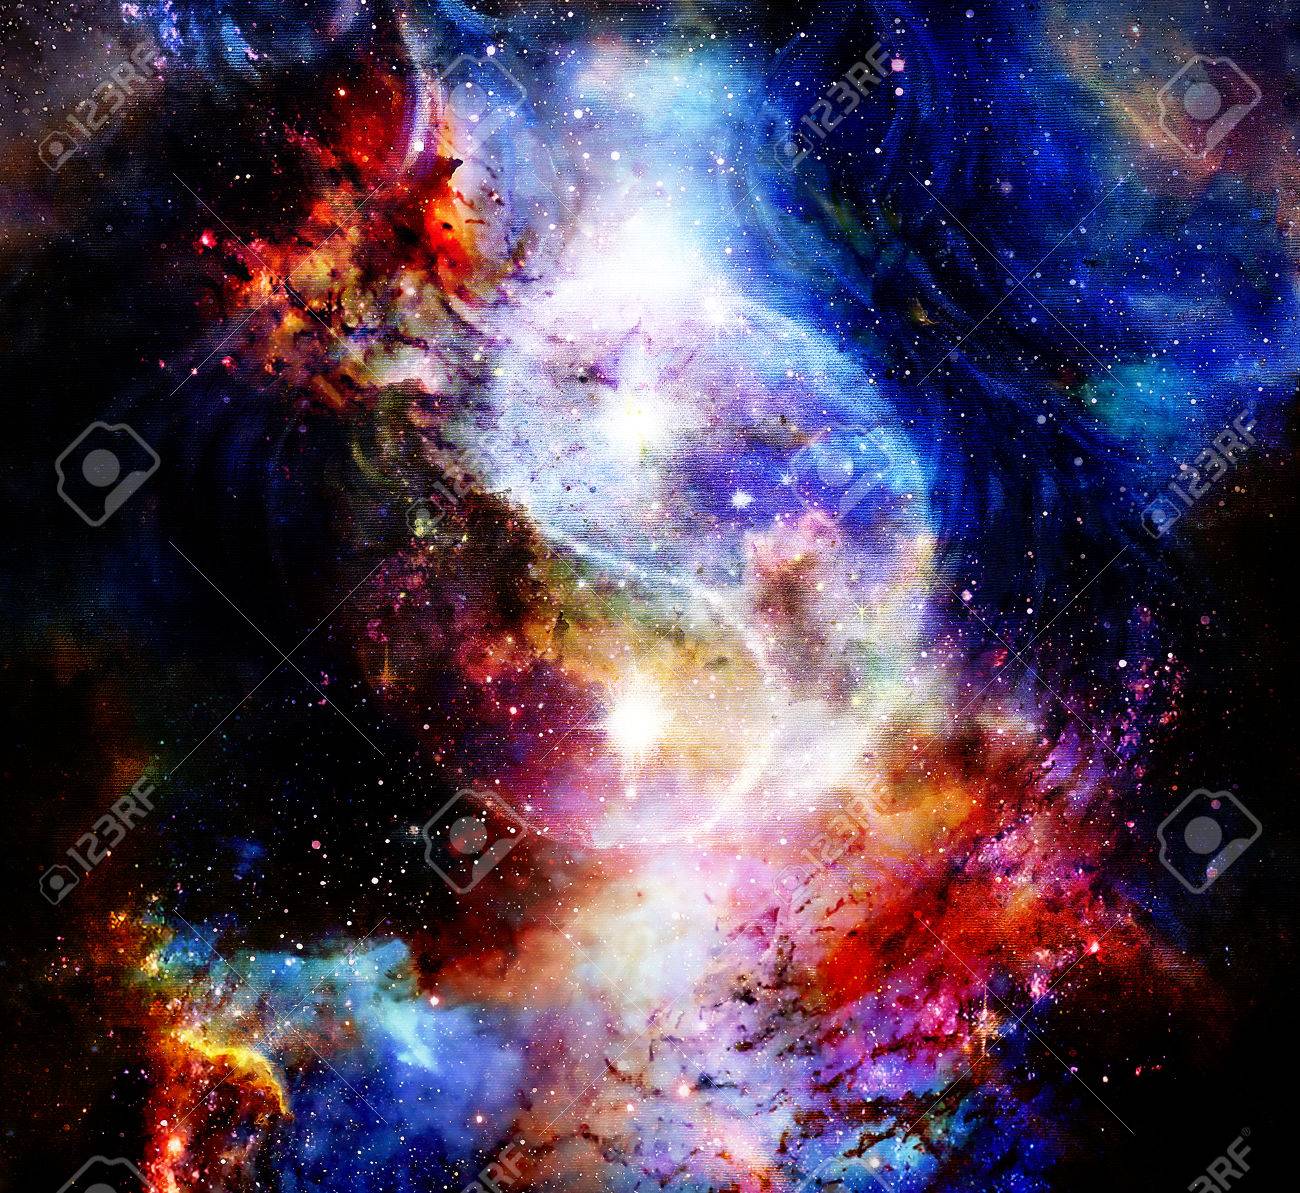 Yin Yang Symbol In Cosmic Space Background Stock Photo